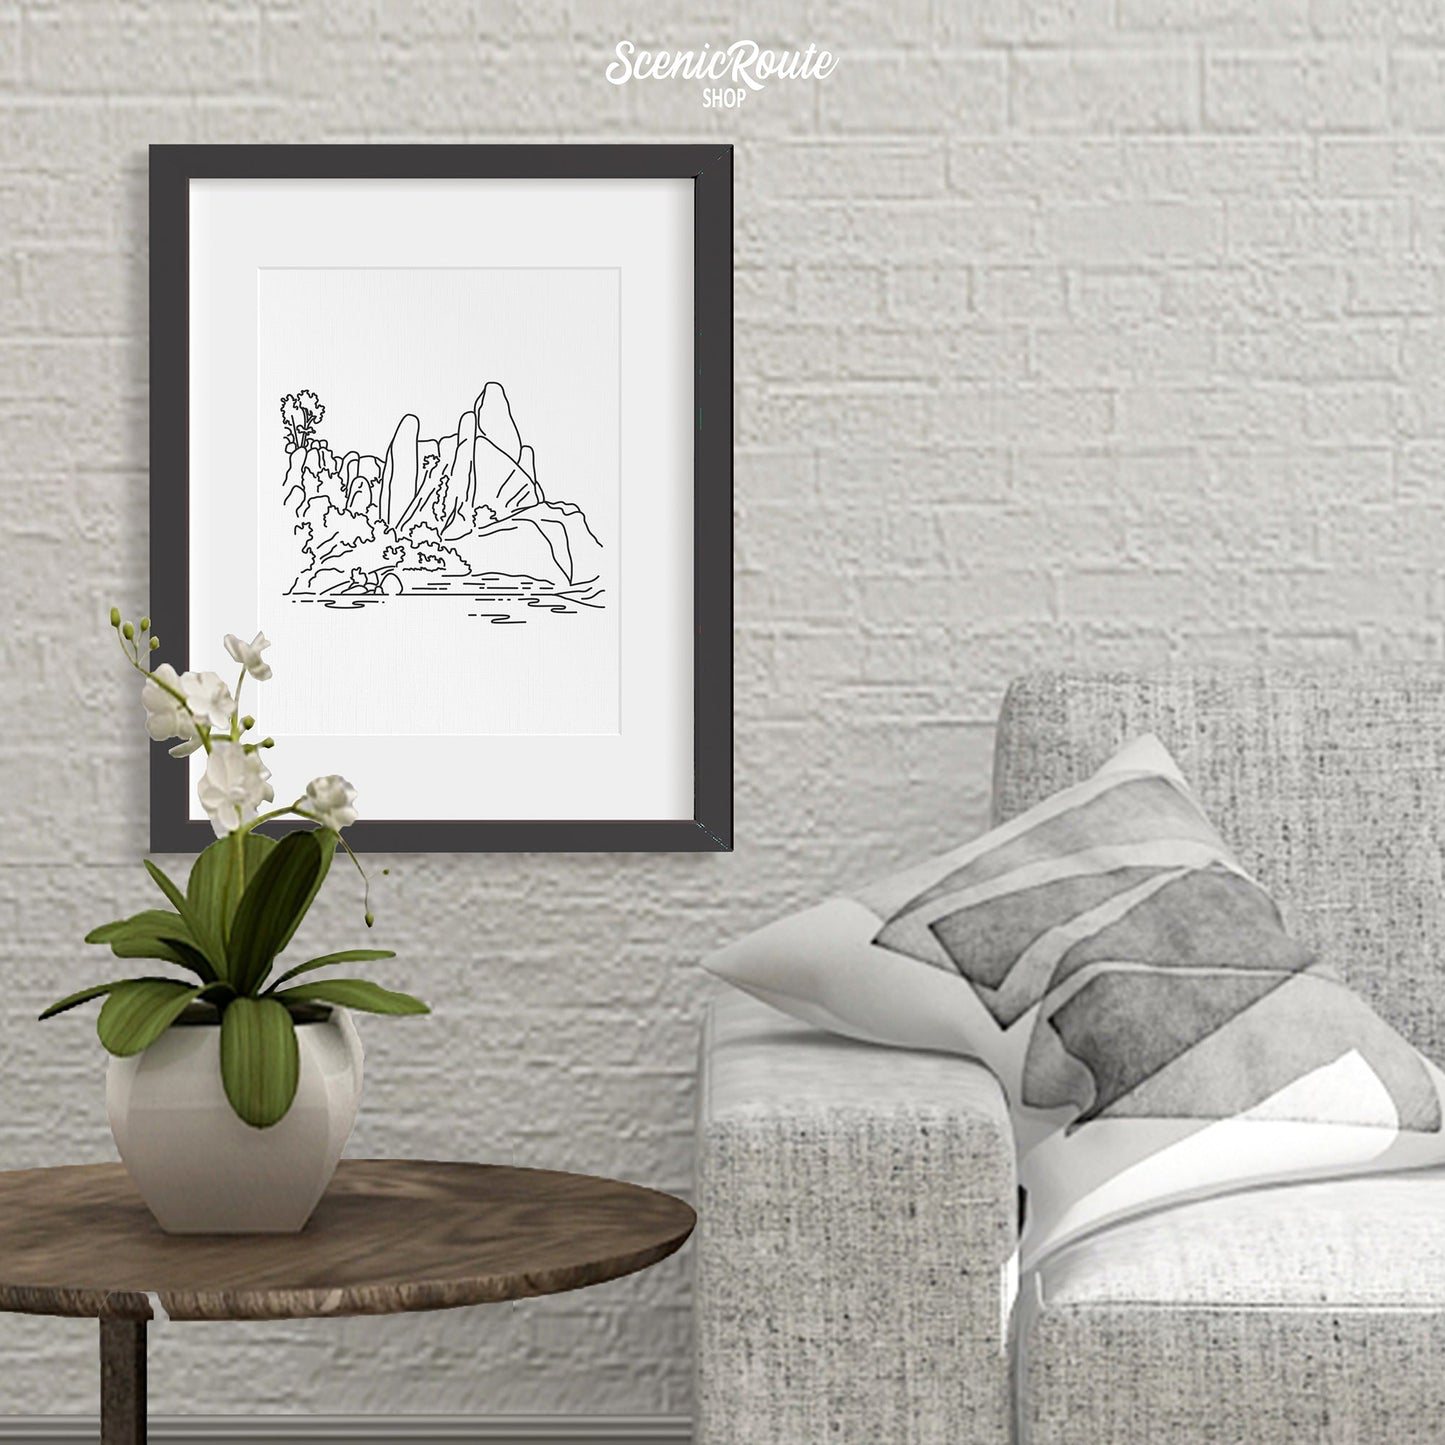 A framed line art drawing of Pinnacles National Park above a side table with an orchid